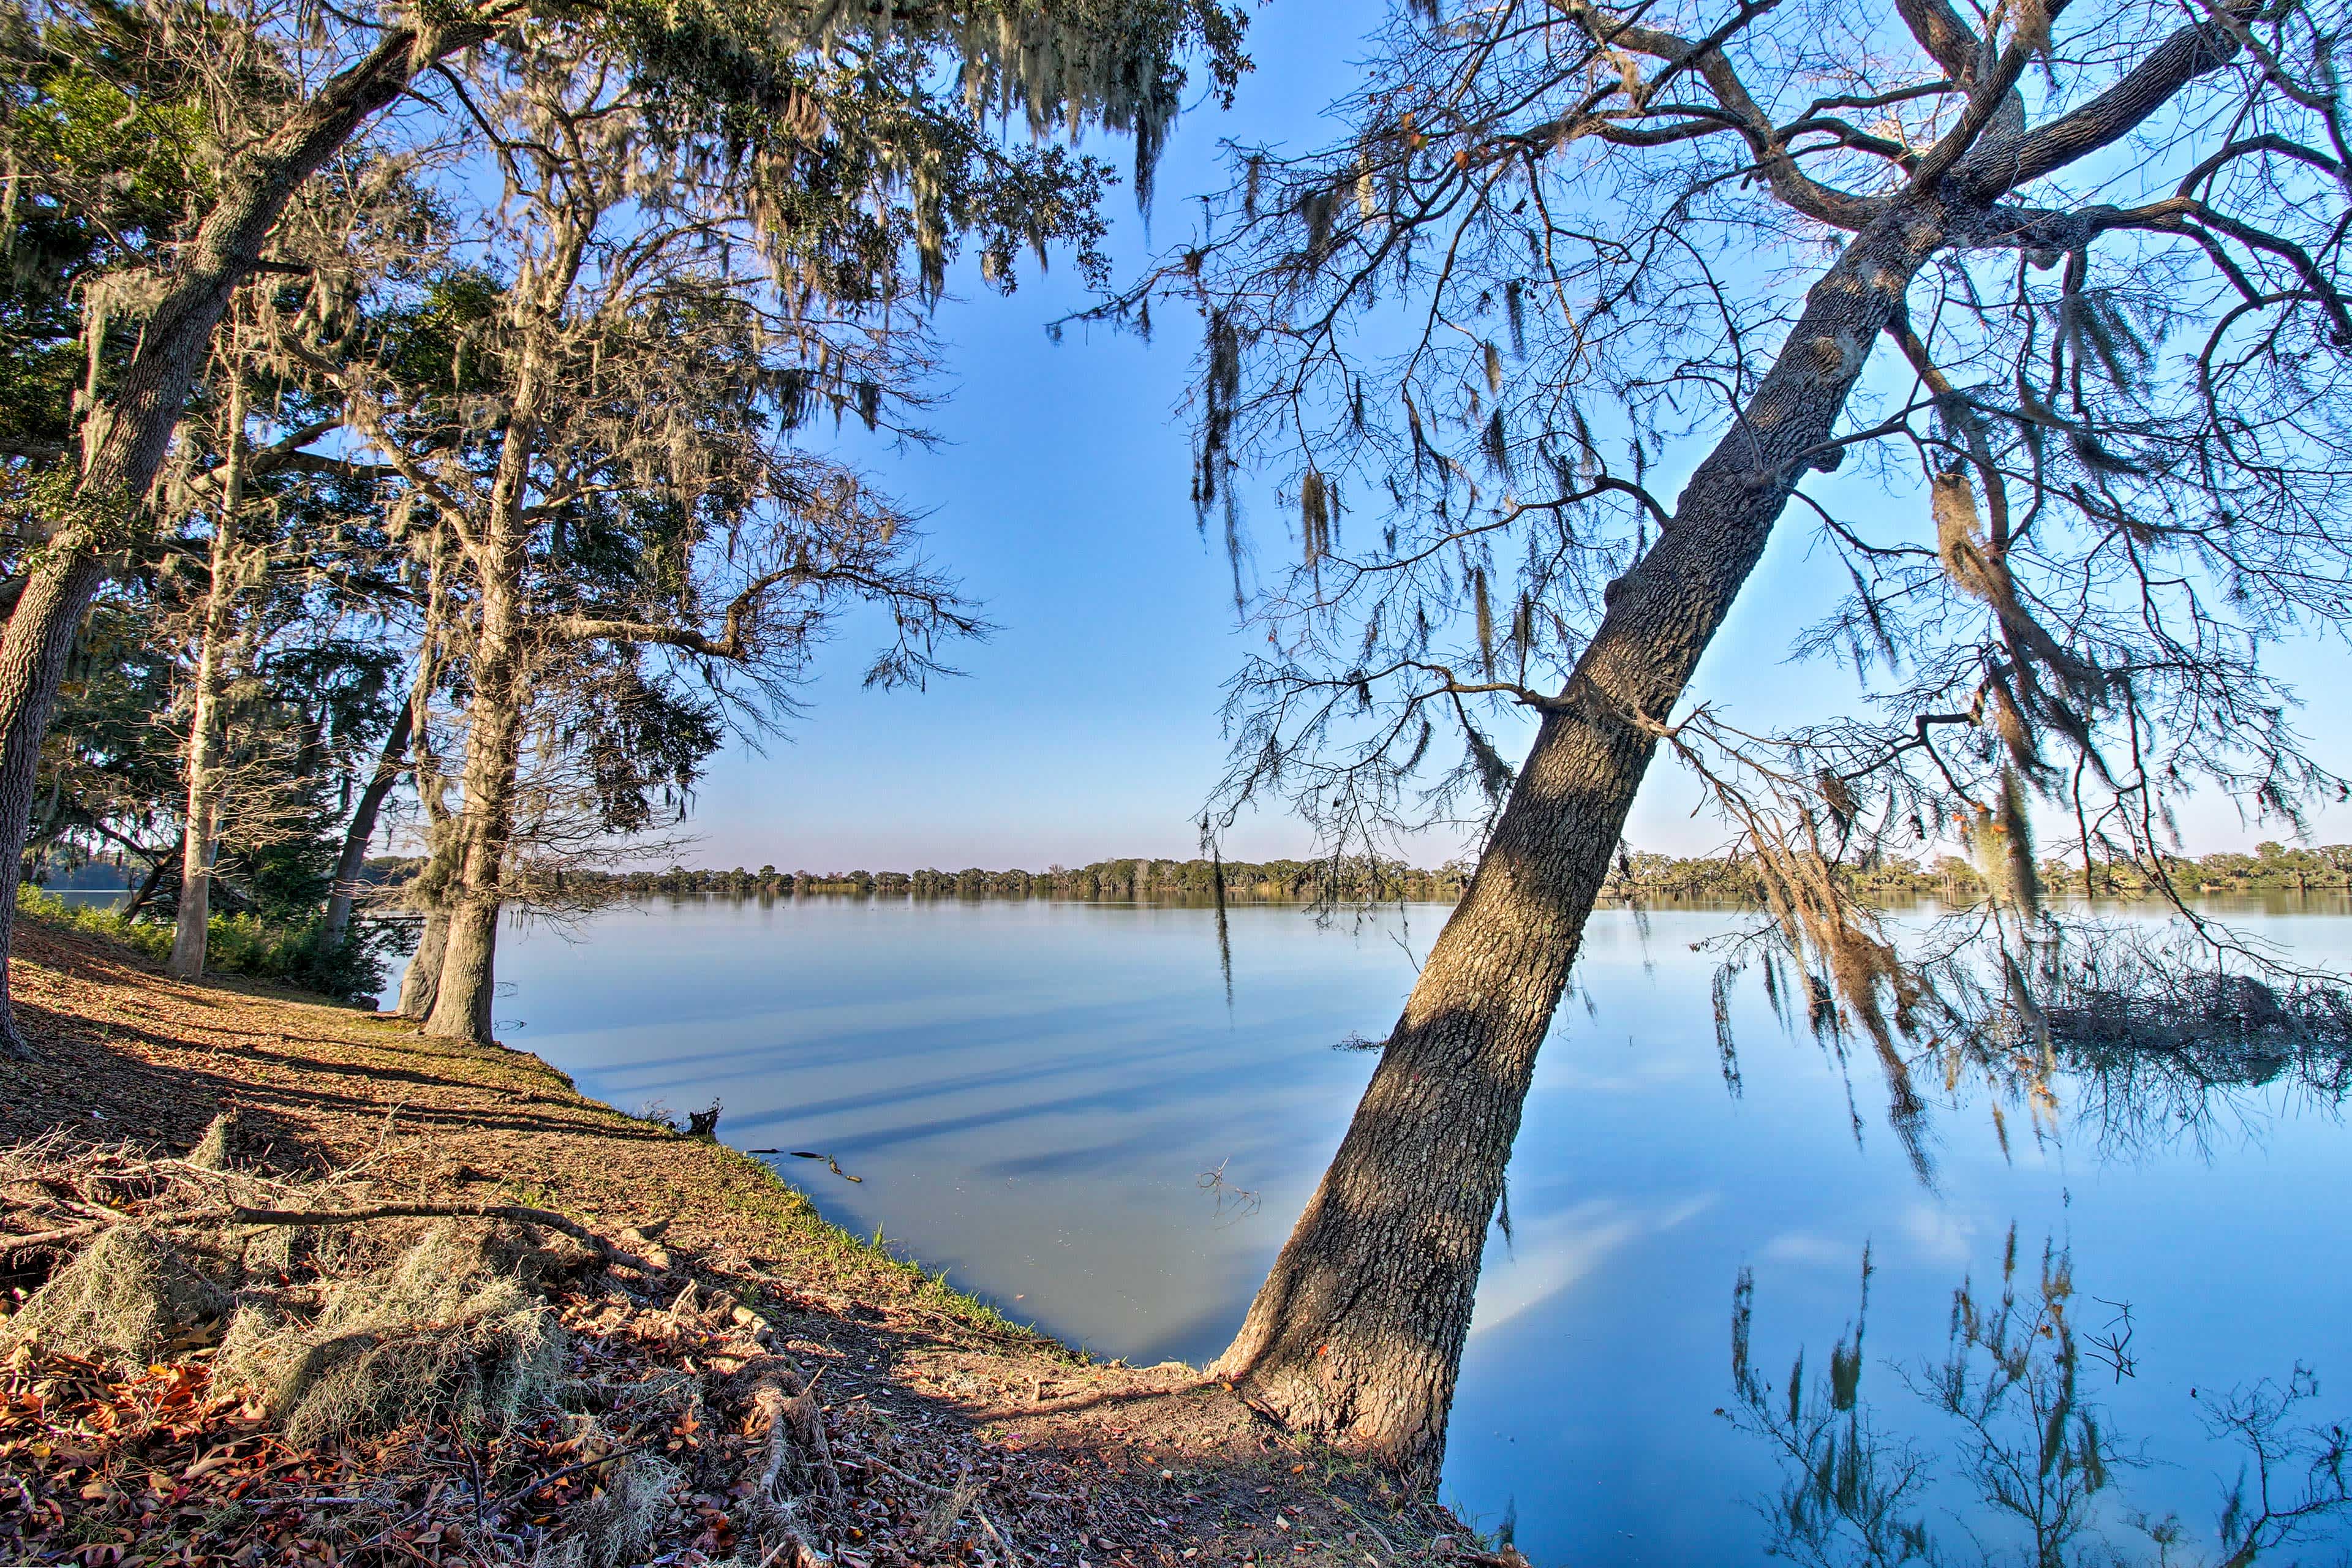 Lake view in Midway, GA with water and blue skies on the right, and trees on the shore on the left